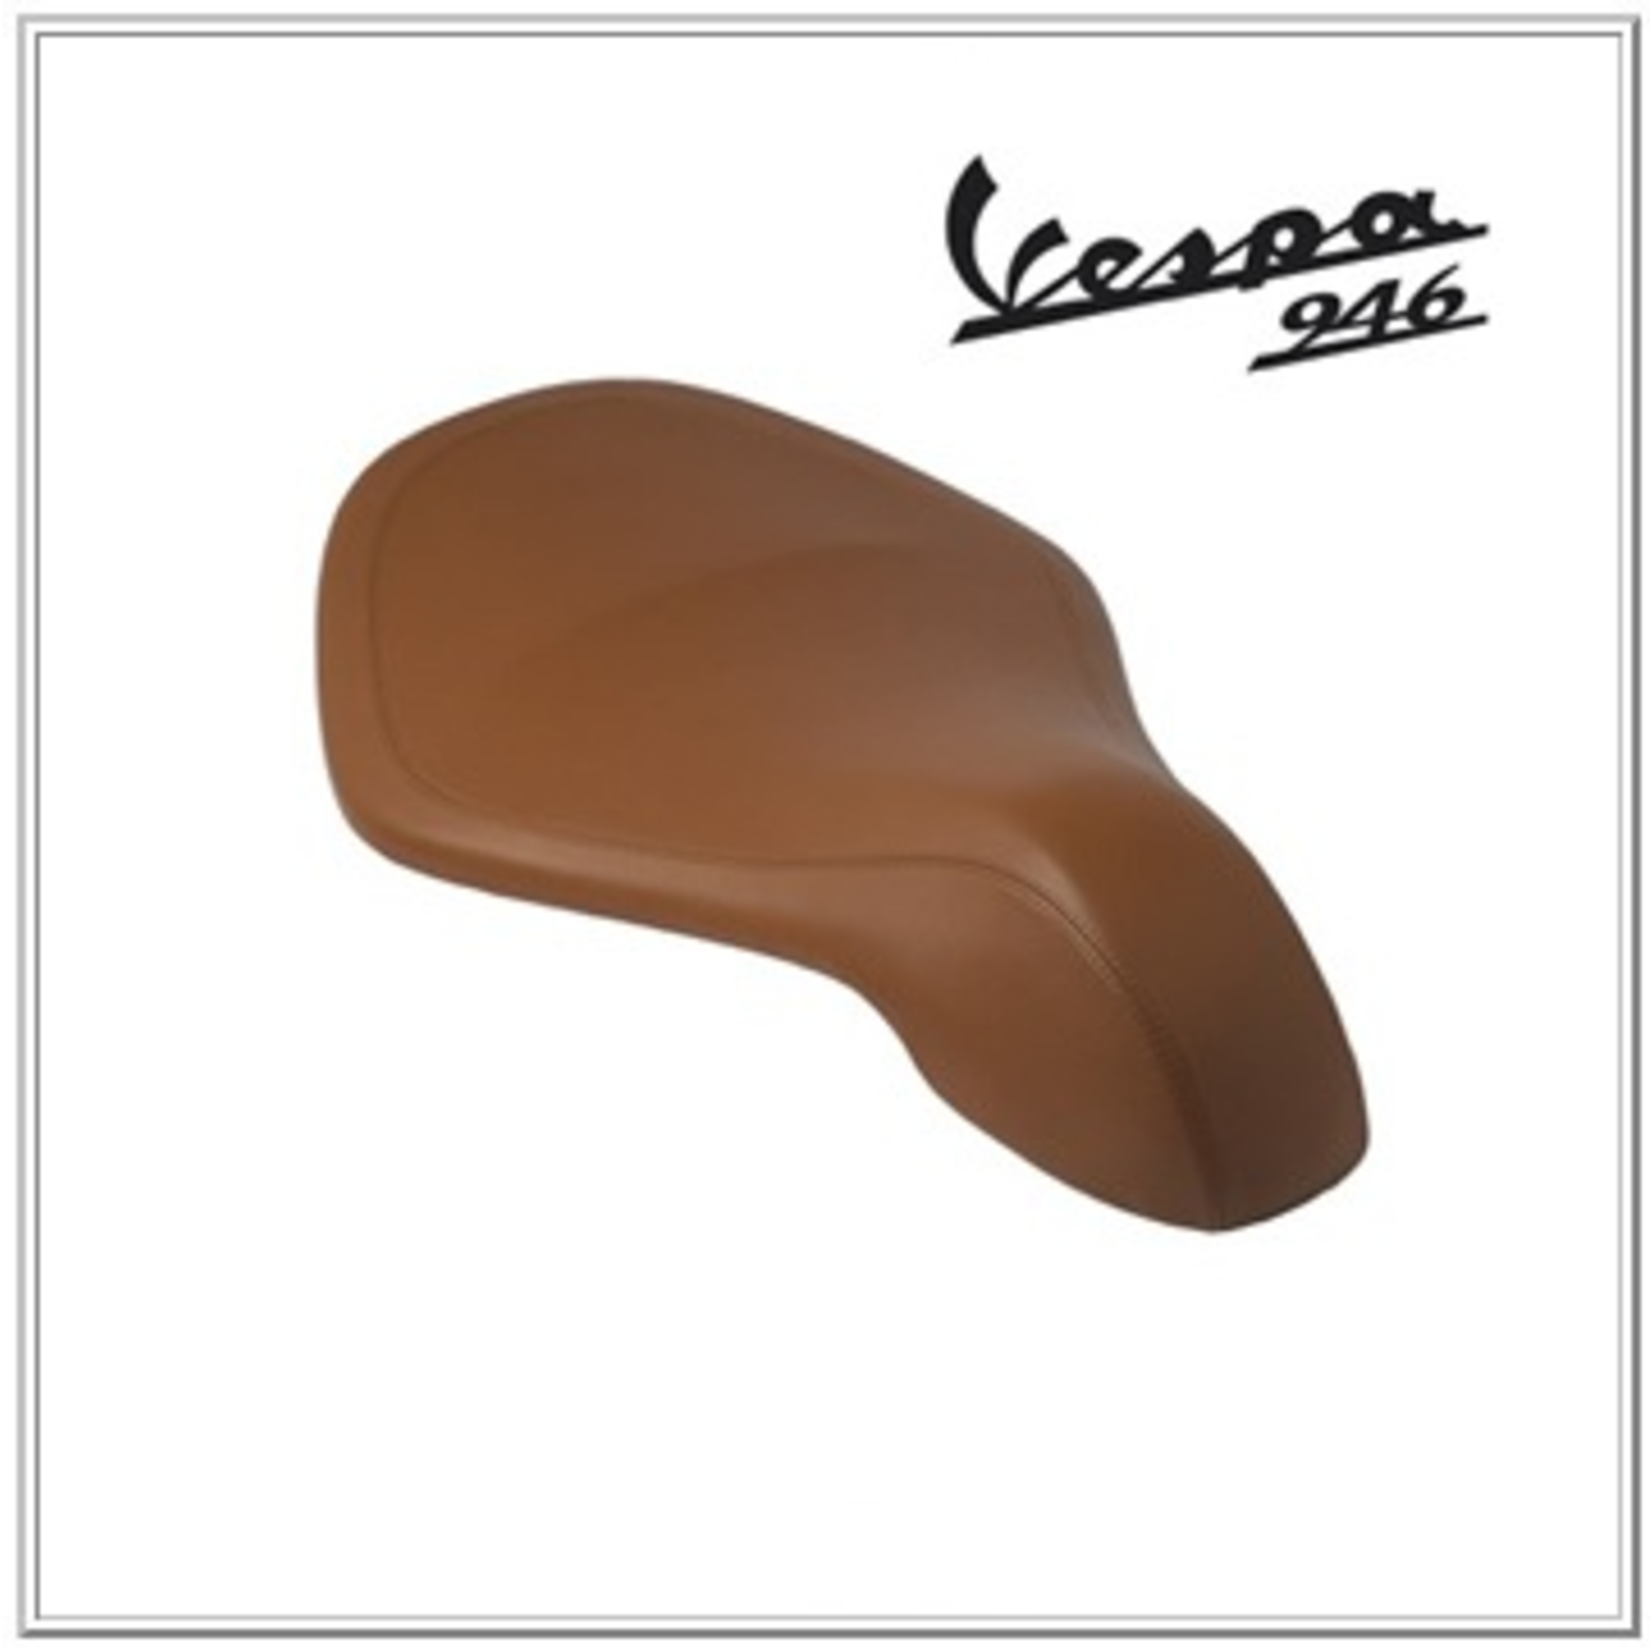 Accessories Saddle, Vespa 946 Brown Leather